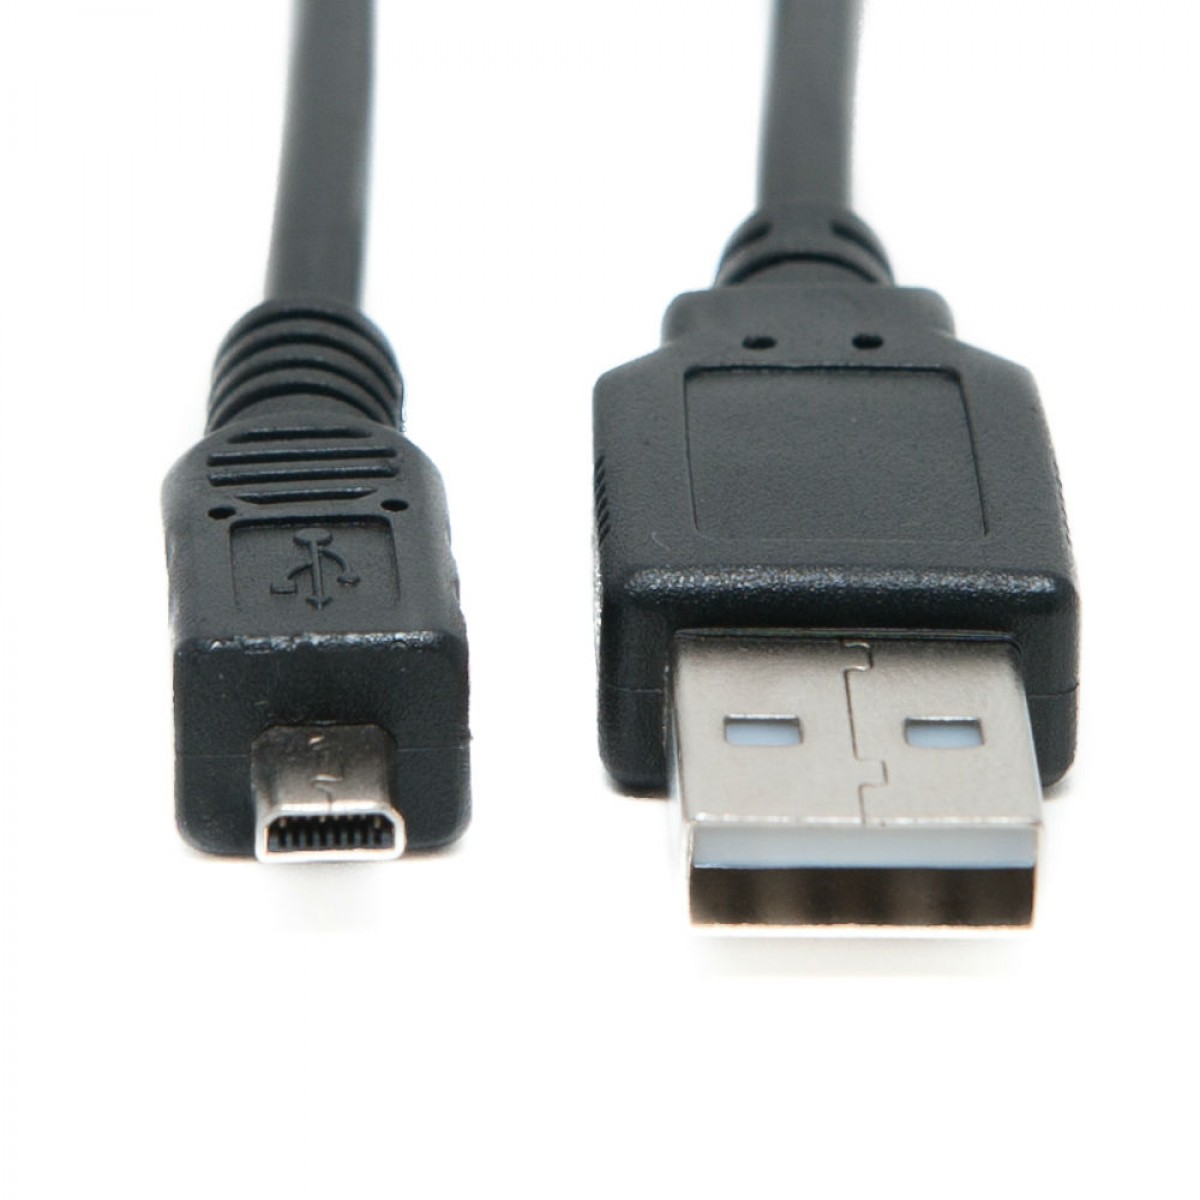 USB Data+A/V TV Video Cable Cord Lead for Polaroid IS2132 i733 i836 T1035 Camera 